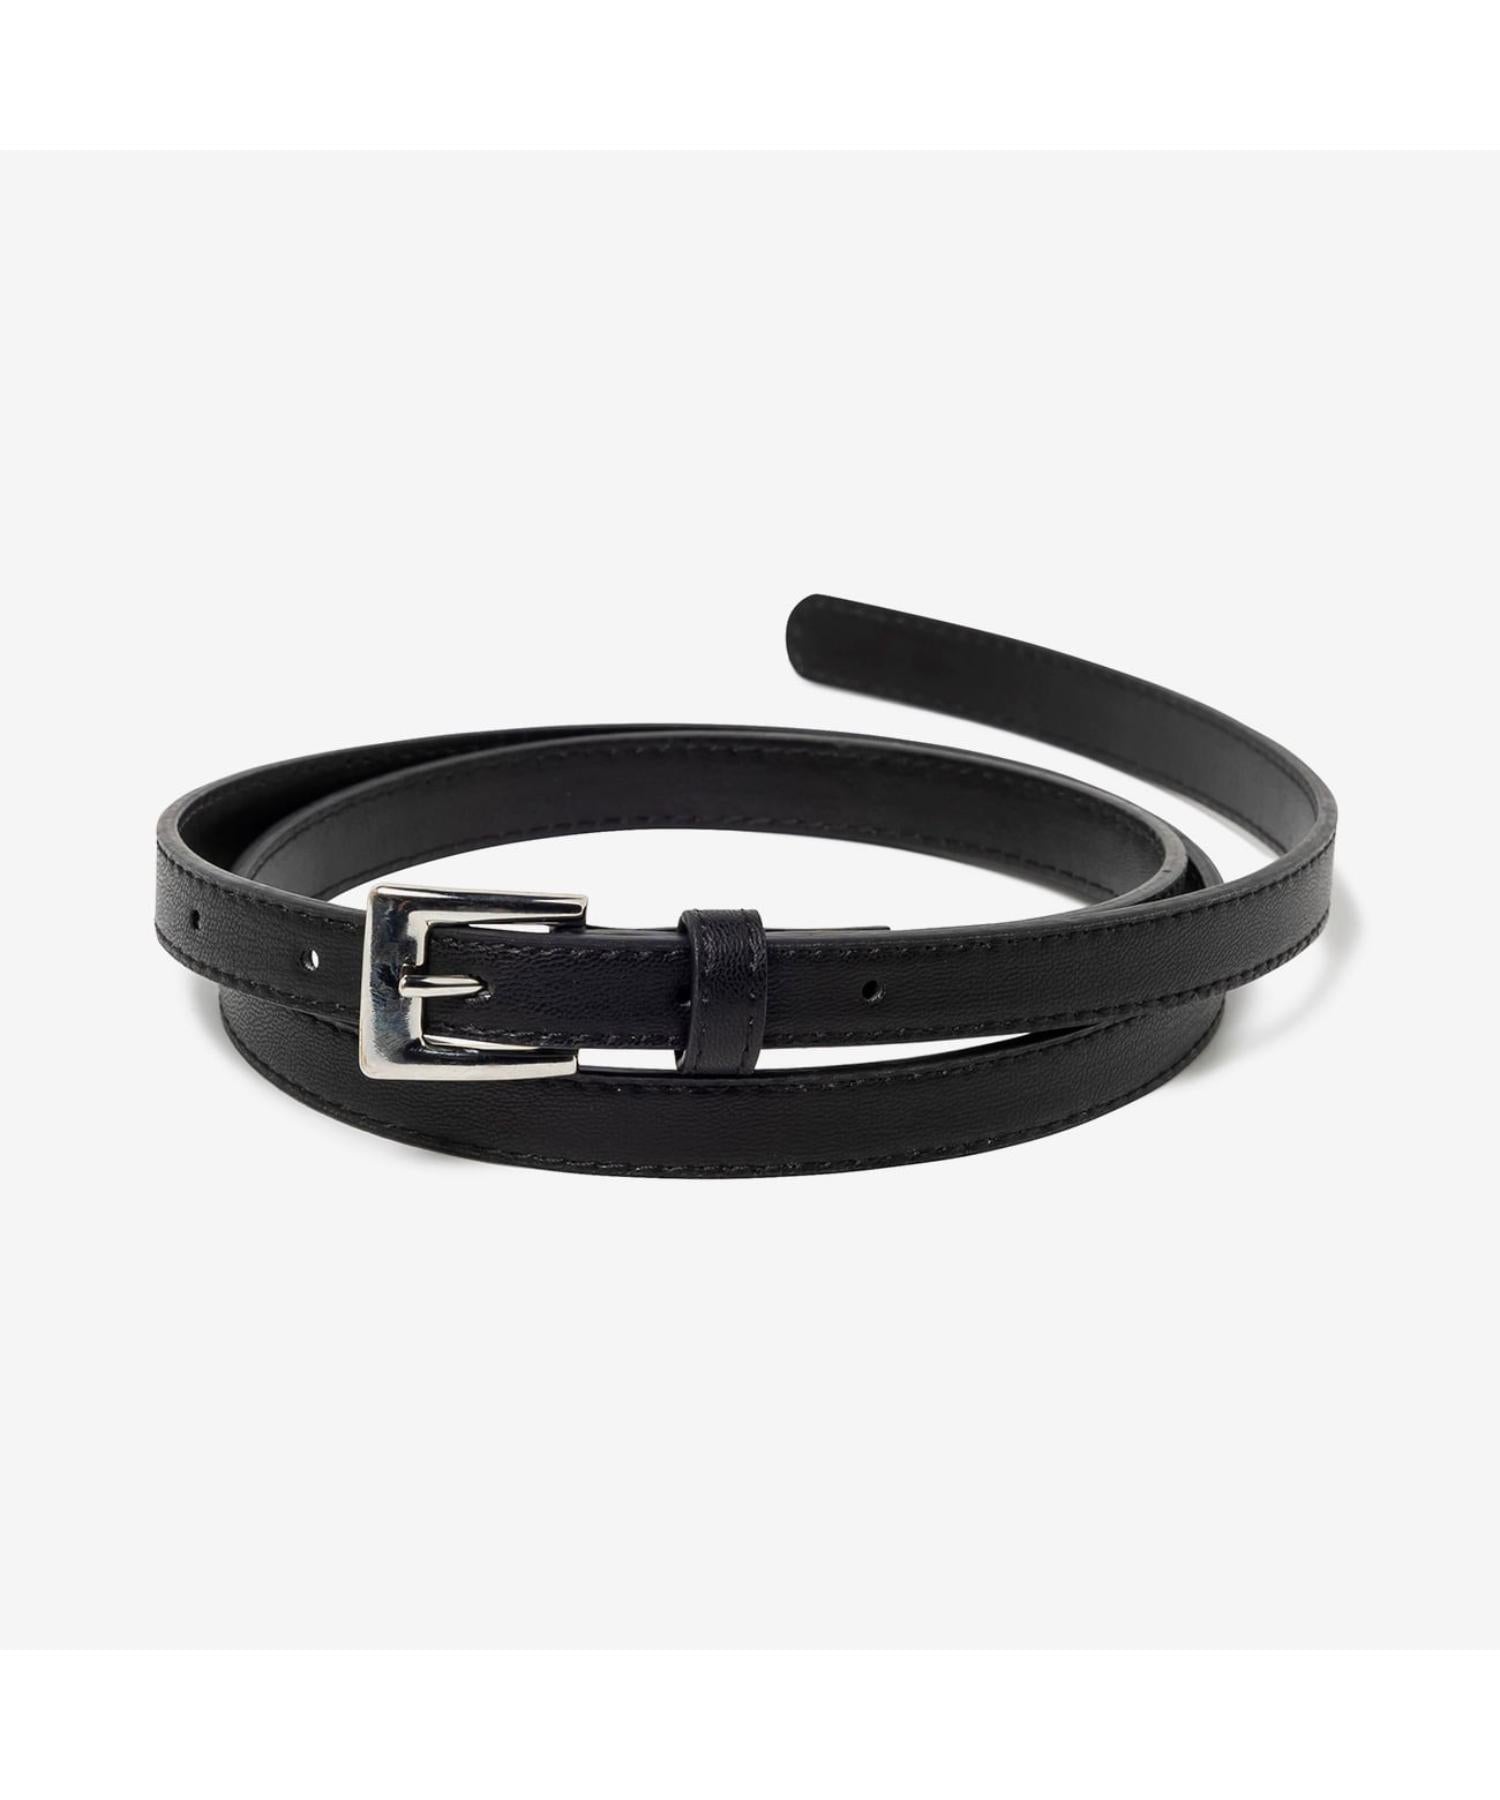 T15 / BELT / SYNTHETIC - WTAPS (ダブルタップス) - goods (グッズ 